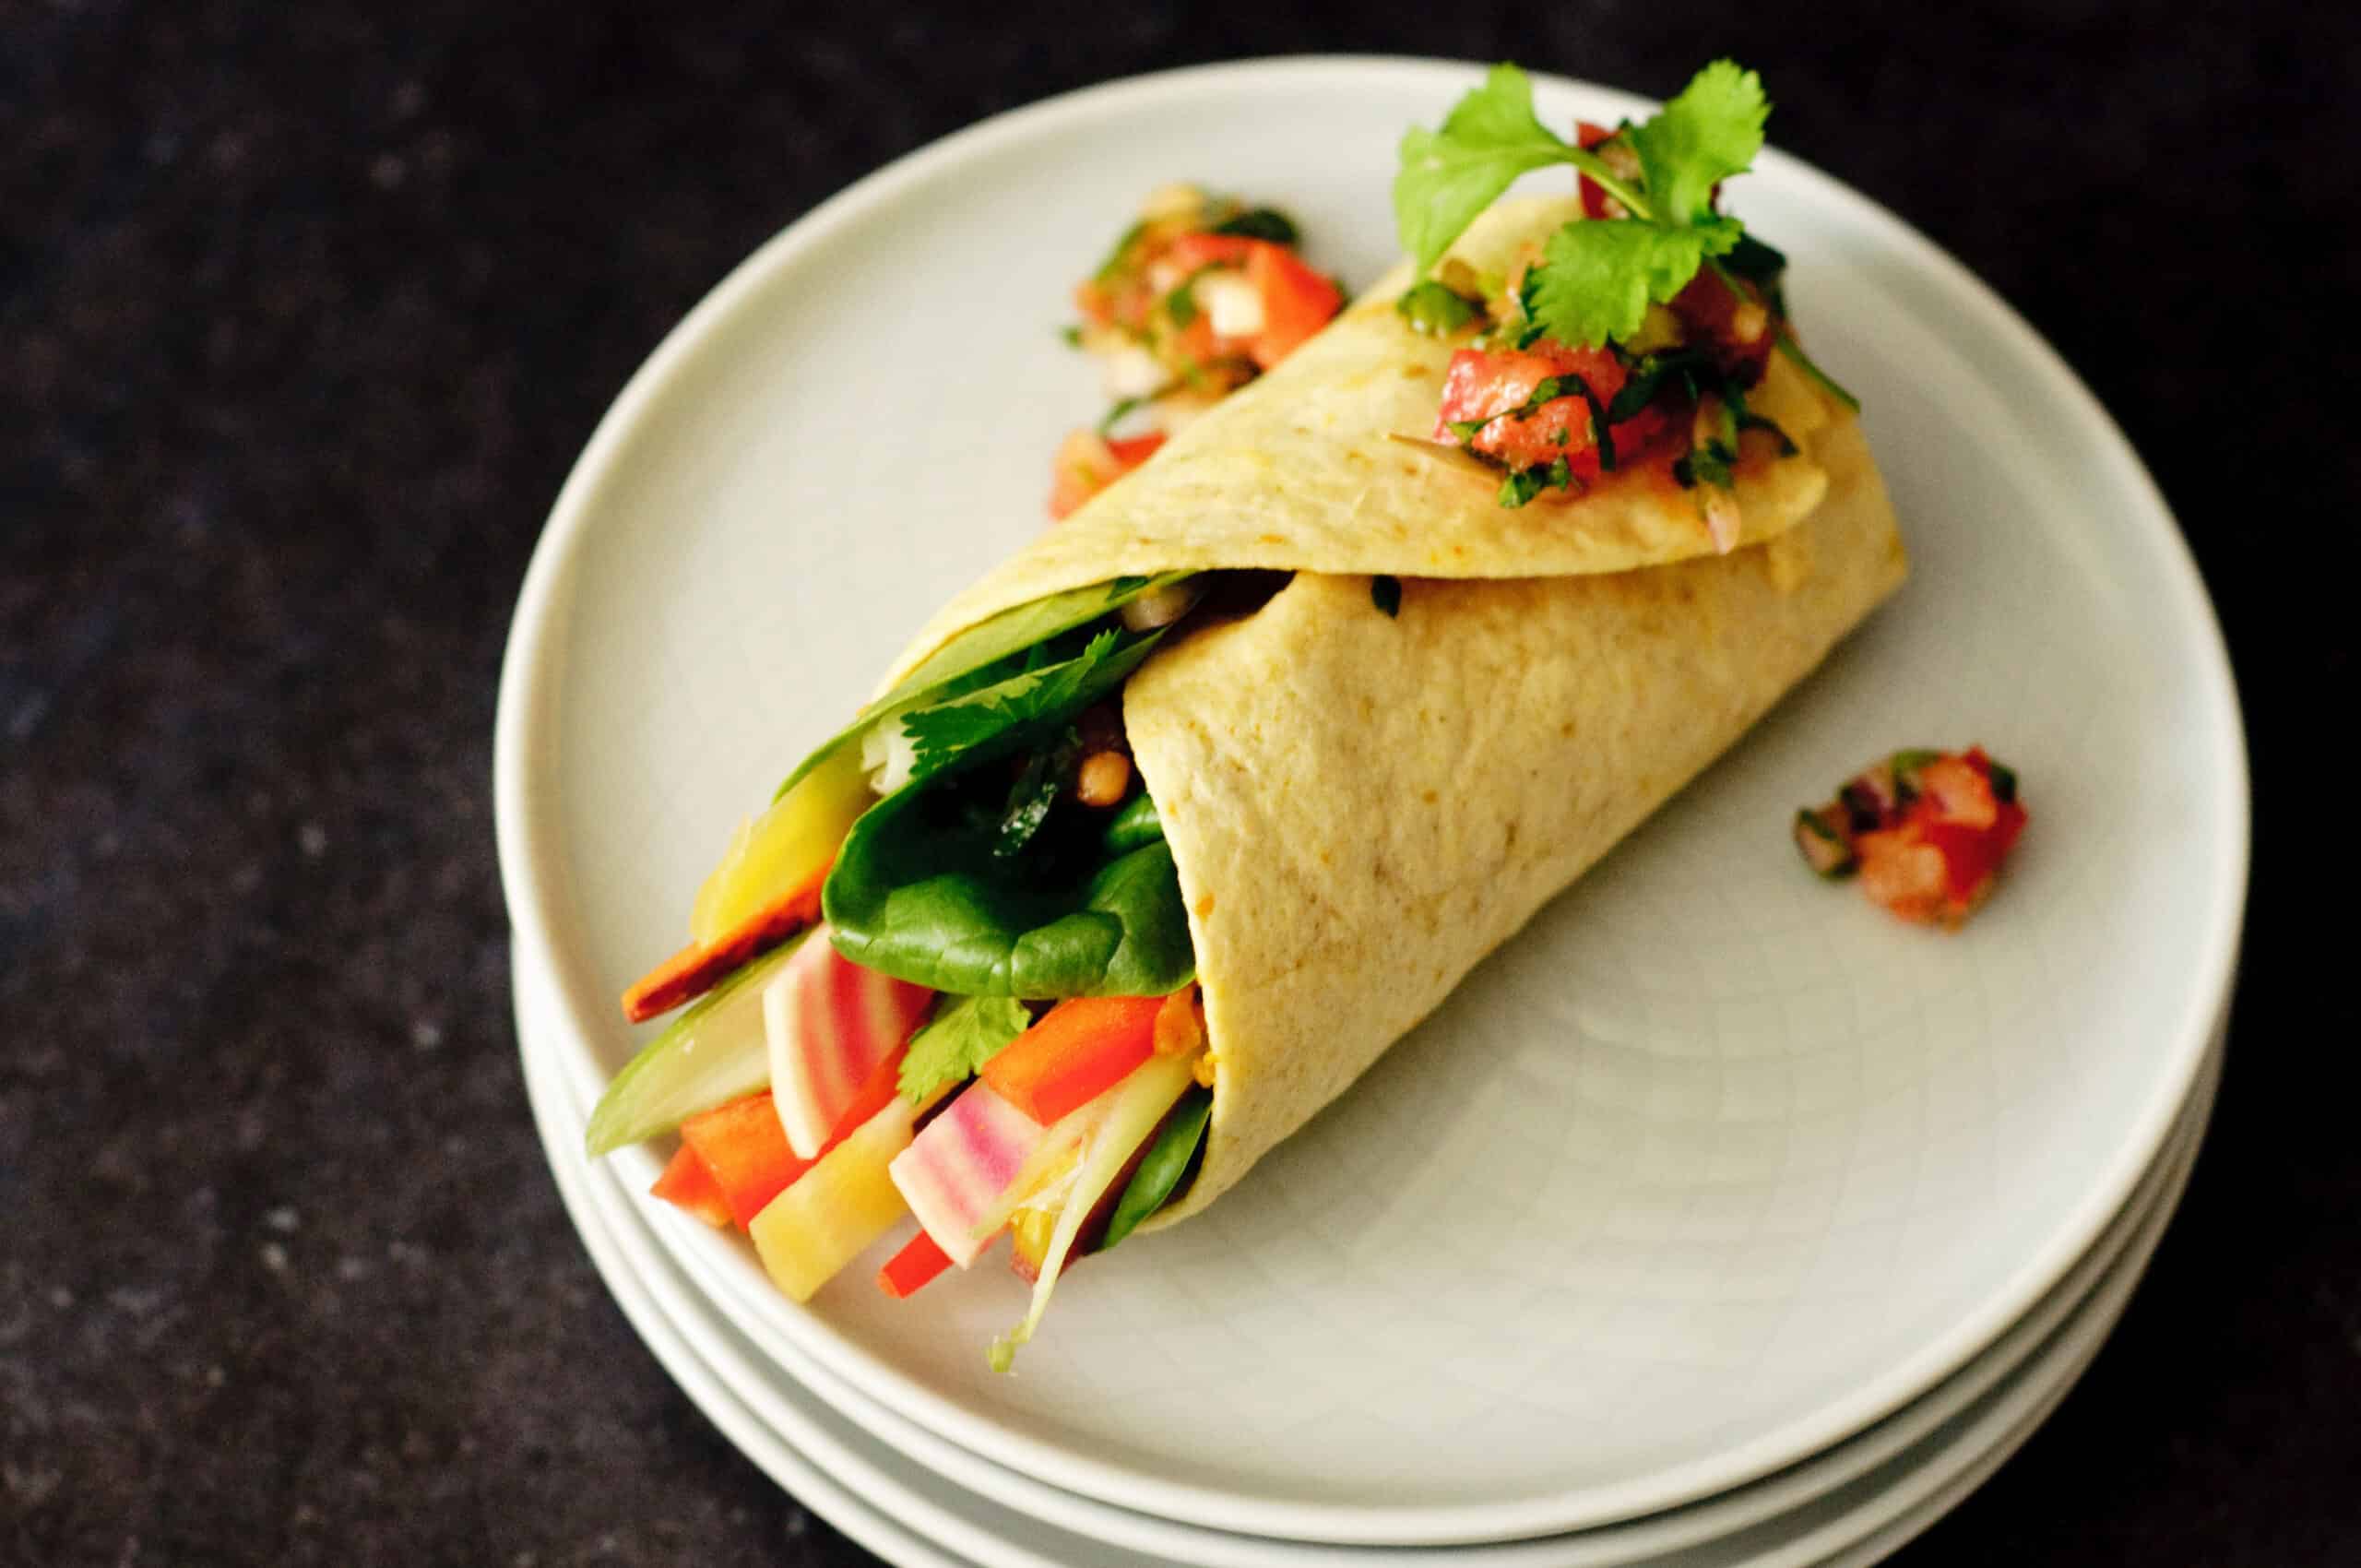 Wrap met hummus rauwkost &amp; salsa - It&amp;#39;s Not About Cooking